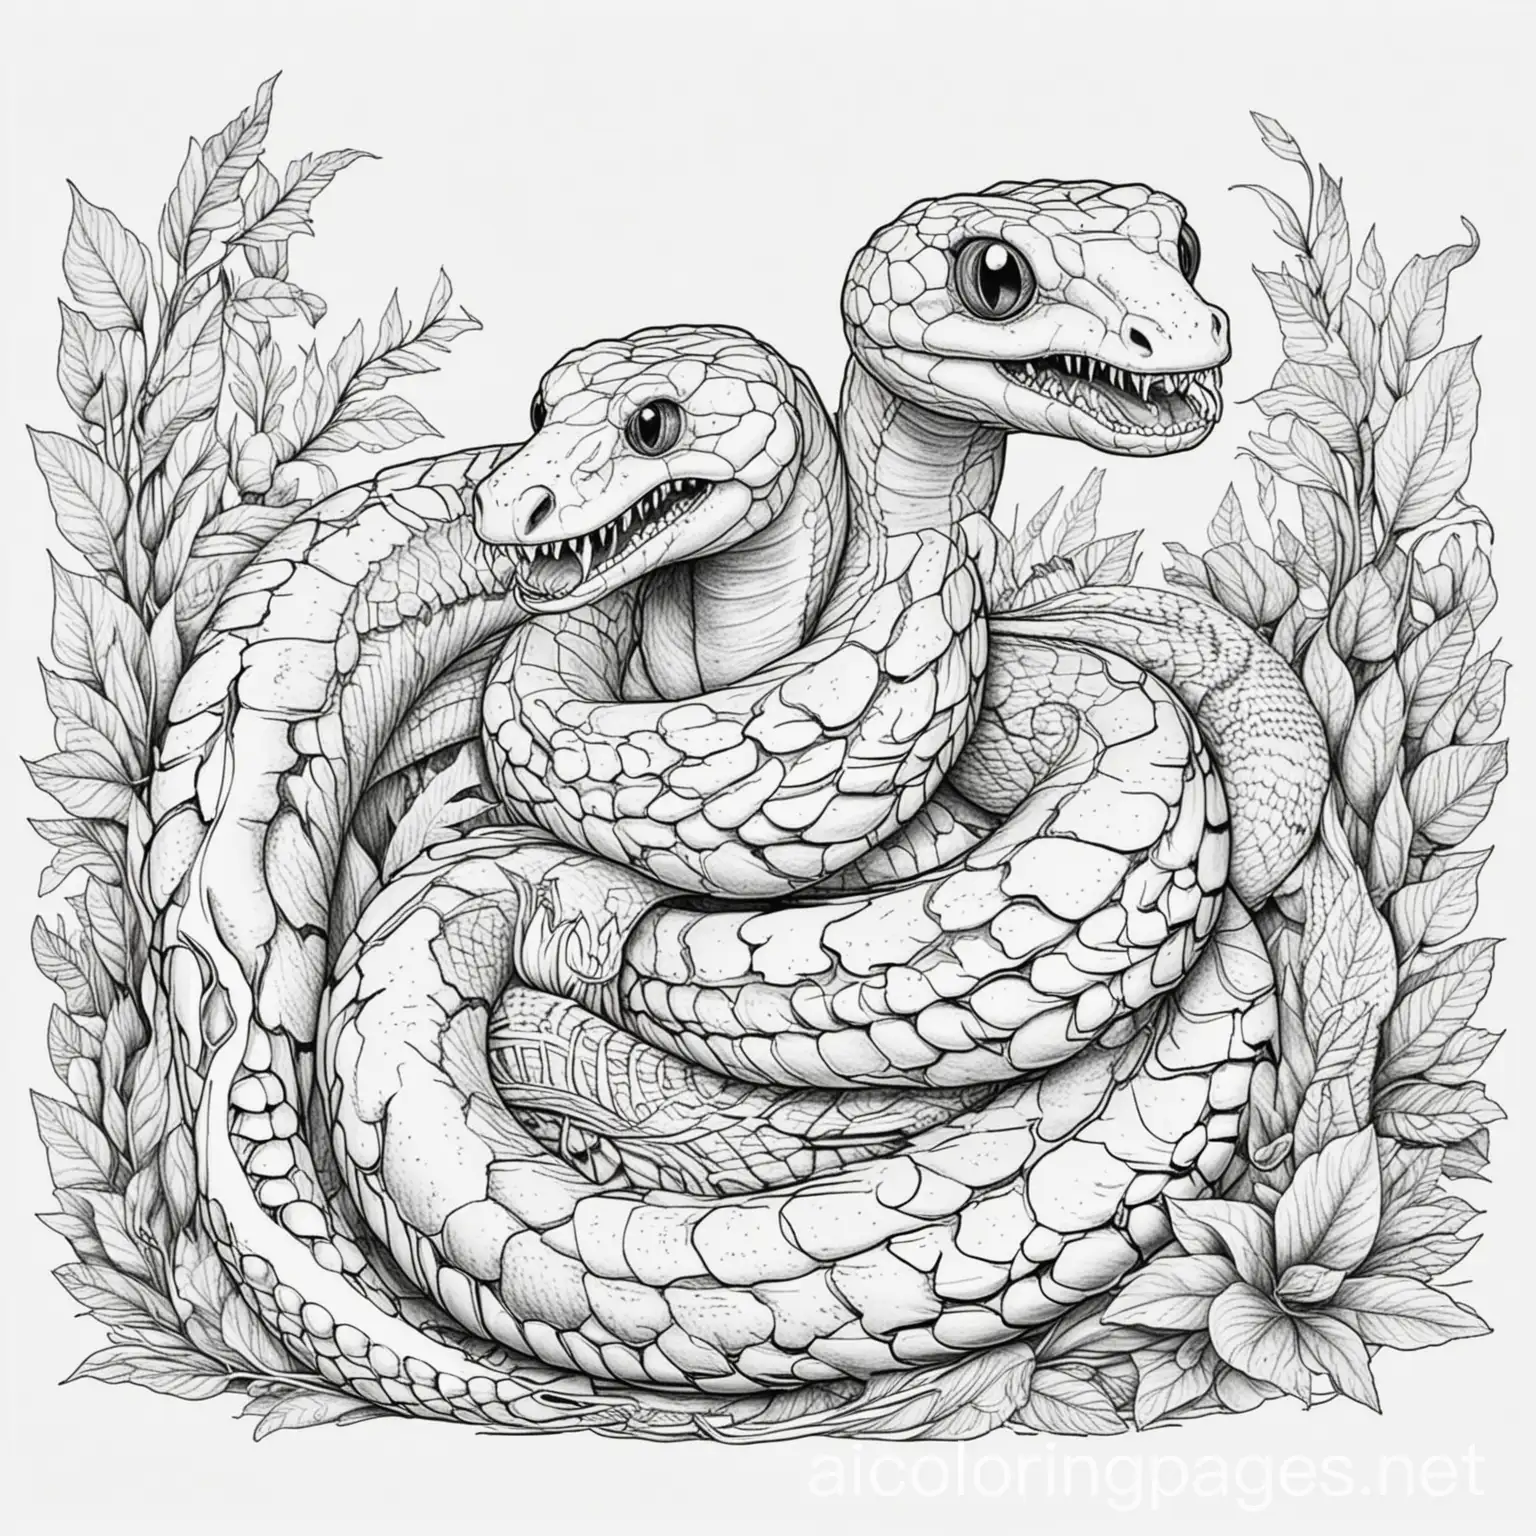 snakes scary pretty, Coloring Page, black and white, line art, white background, Simplicity, Ample White Space. The background of the coloring page is plain white to make it easy for young children to color within the lines. The outlines of all the subjects are easy to distinguish, making it simple for kids to color without too much difficulty